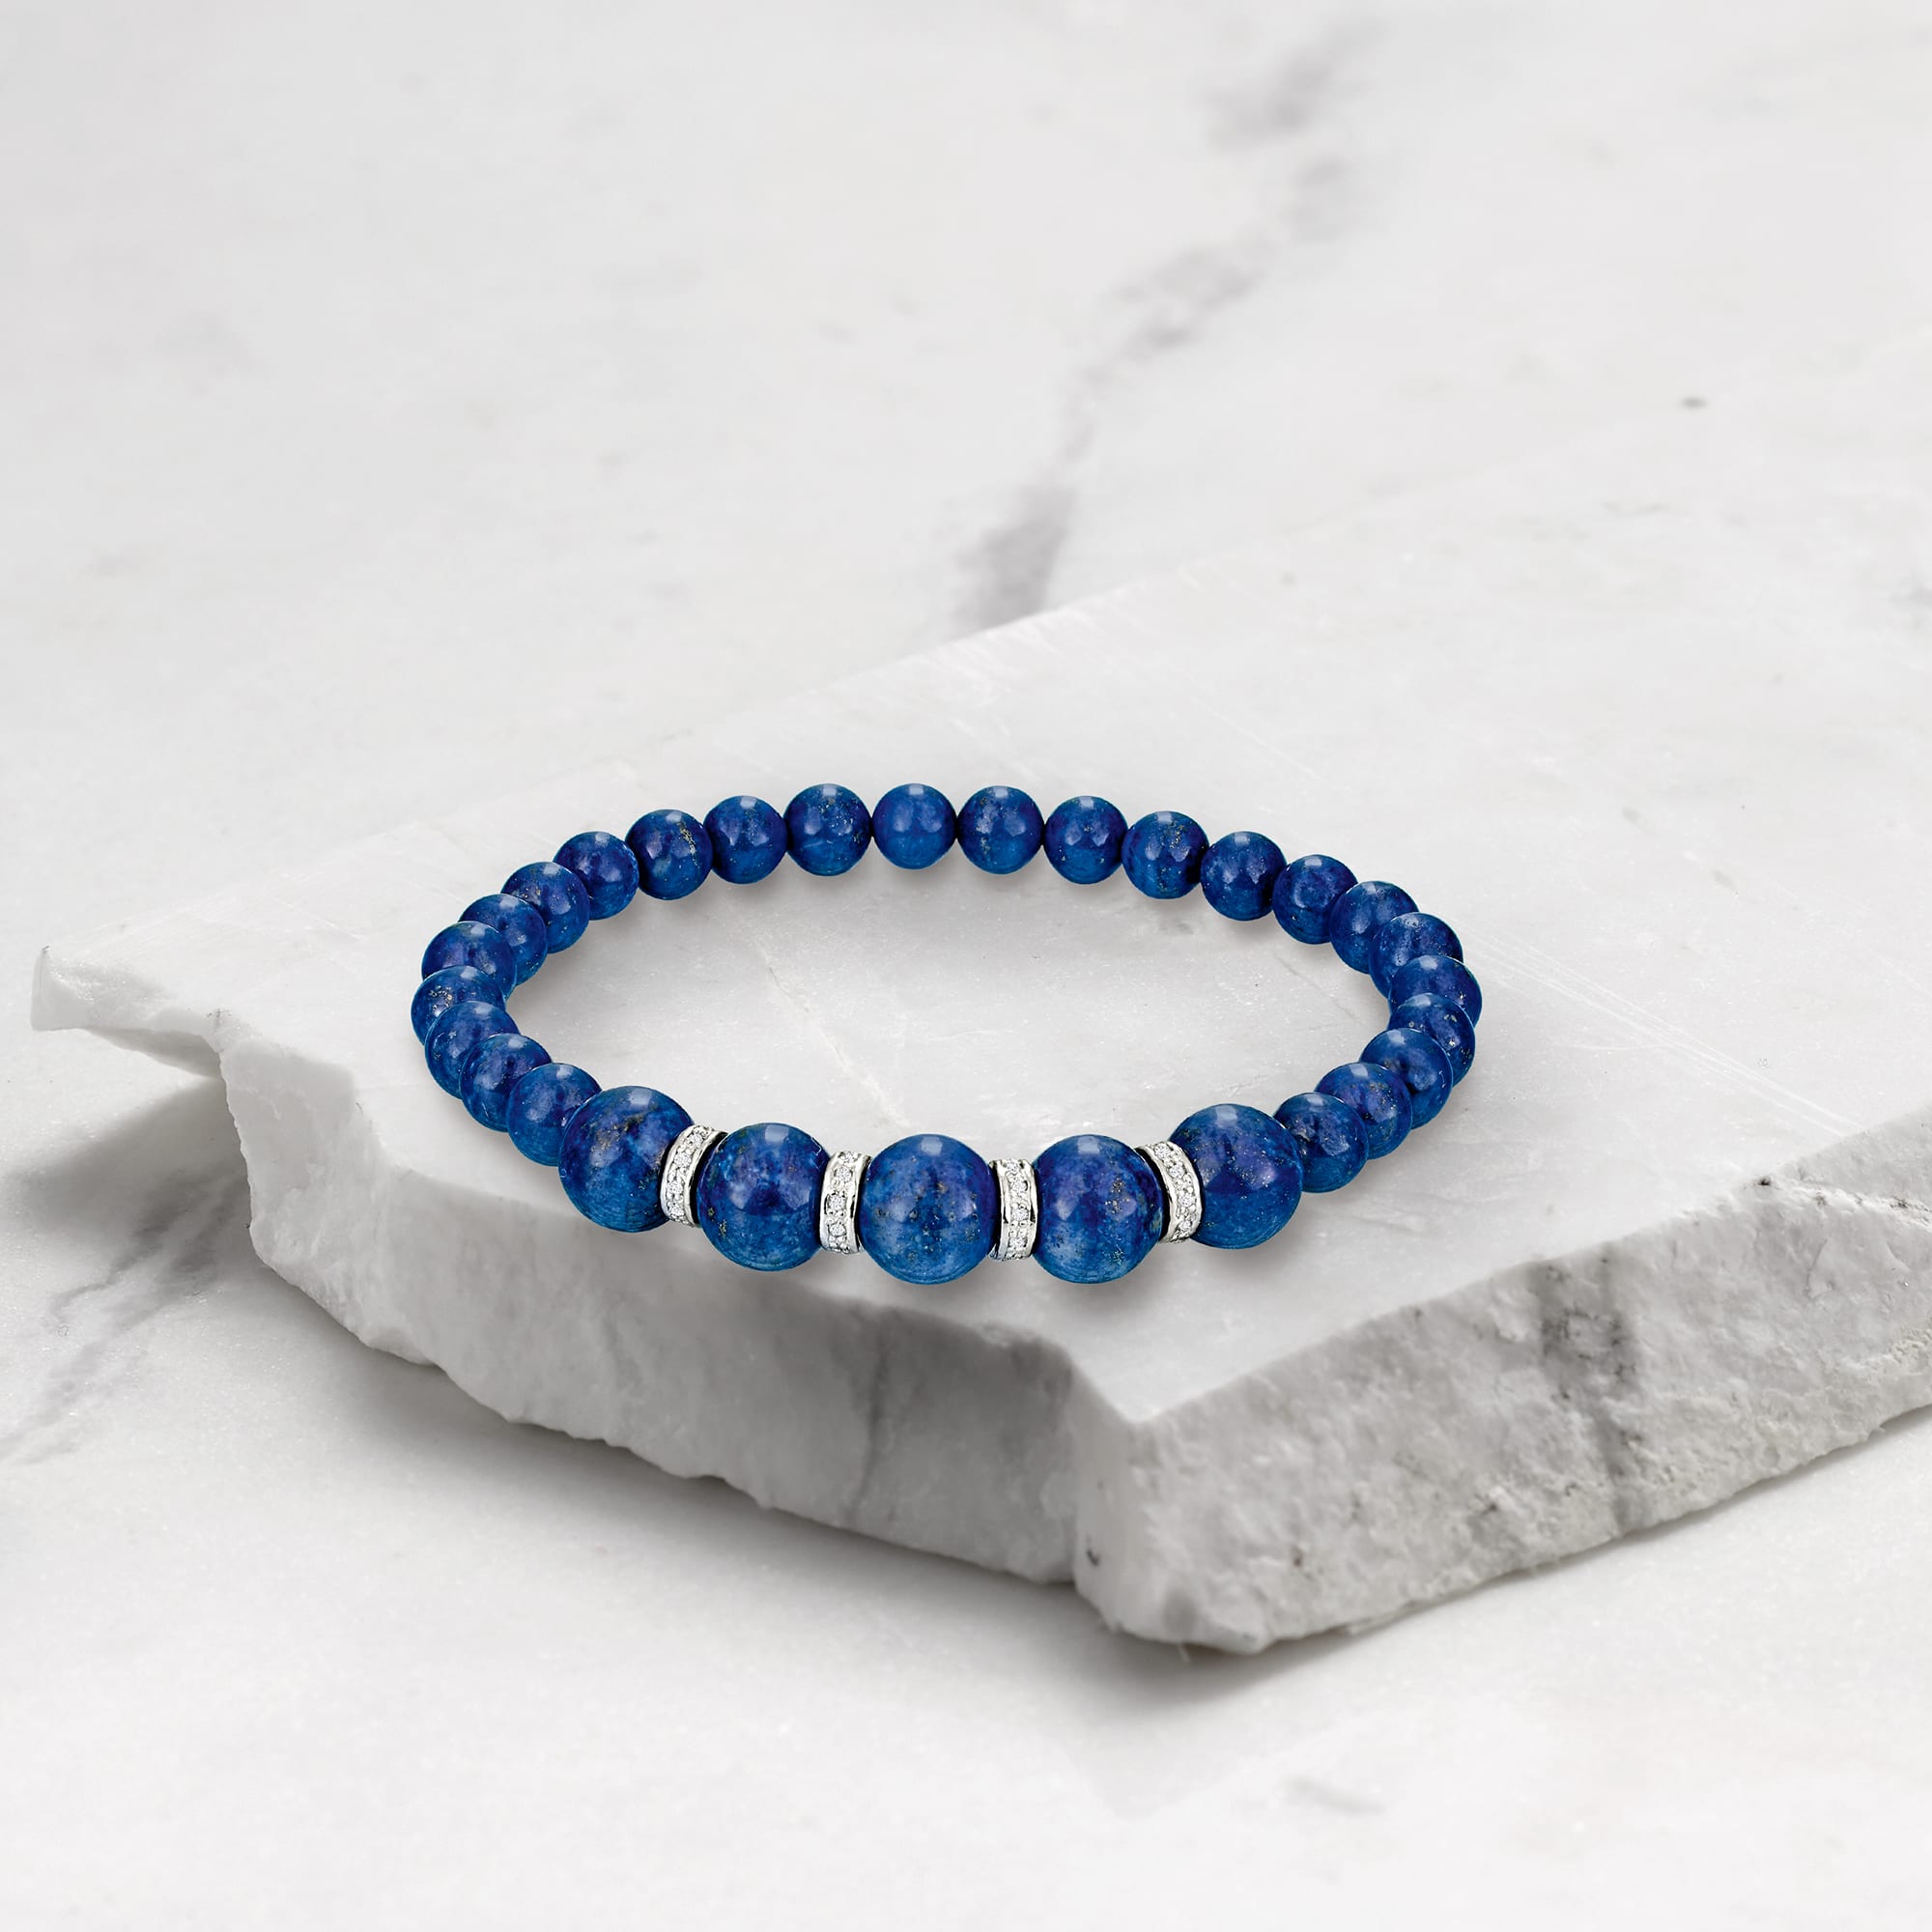 6-8mm Lapis Bead and .24 ct. t.w. Diamond Stretch Bracelet with Sterling  Silver | Ross-Simons